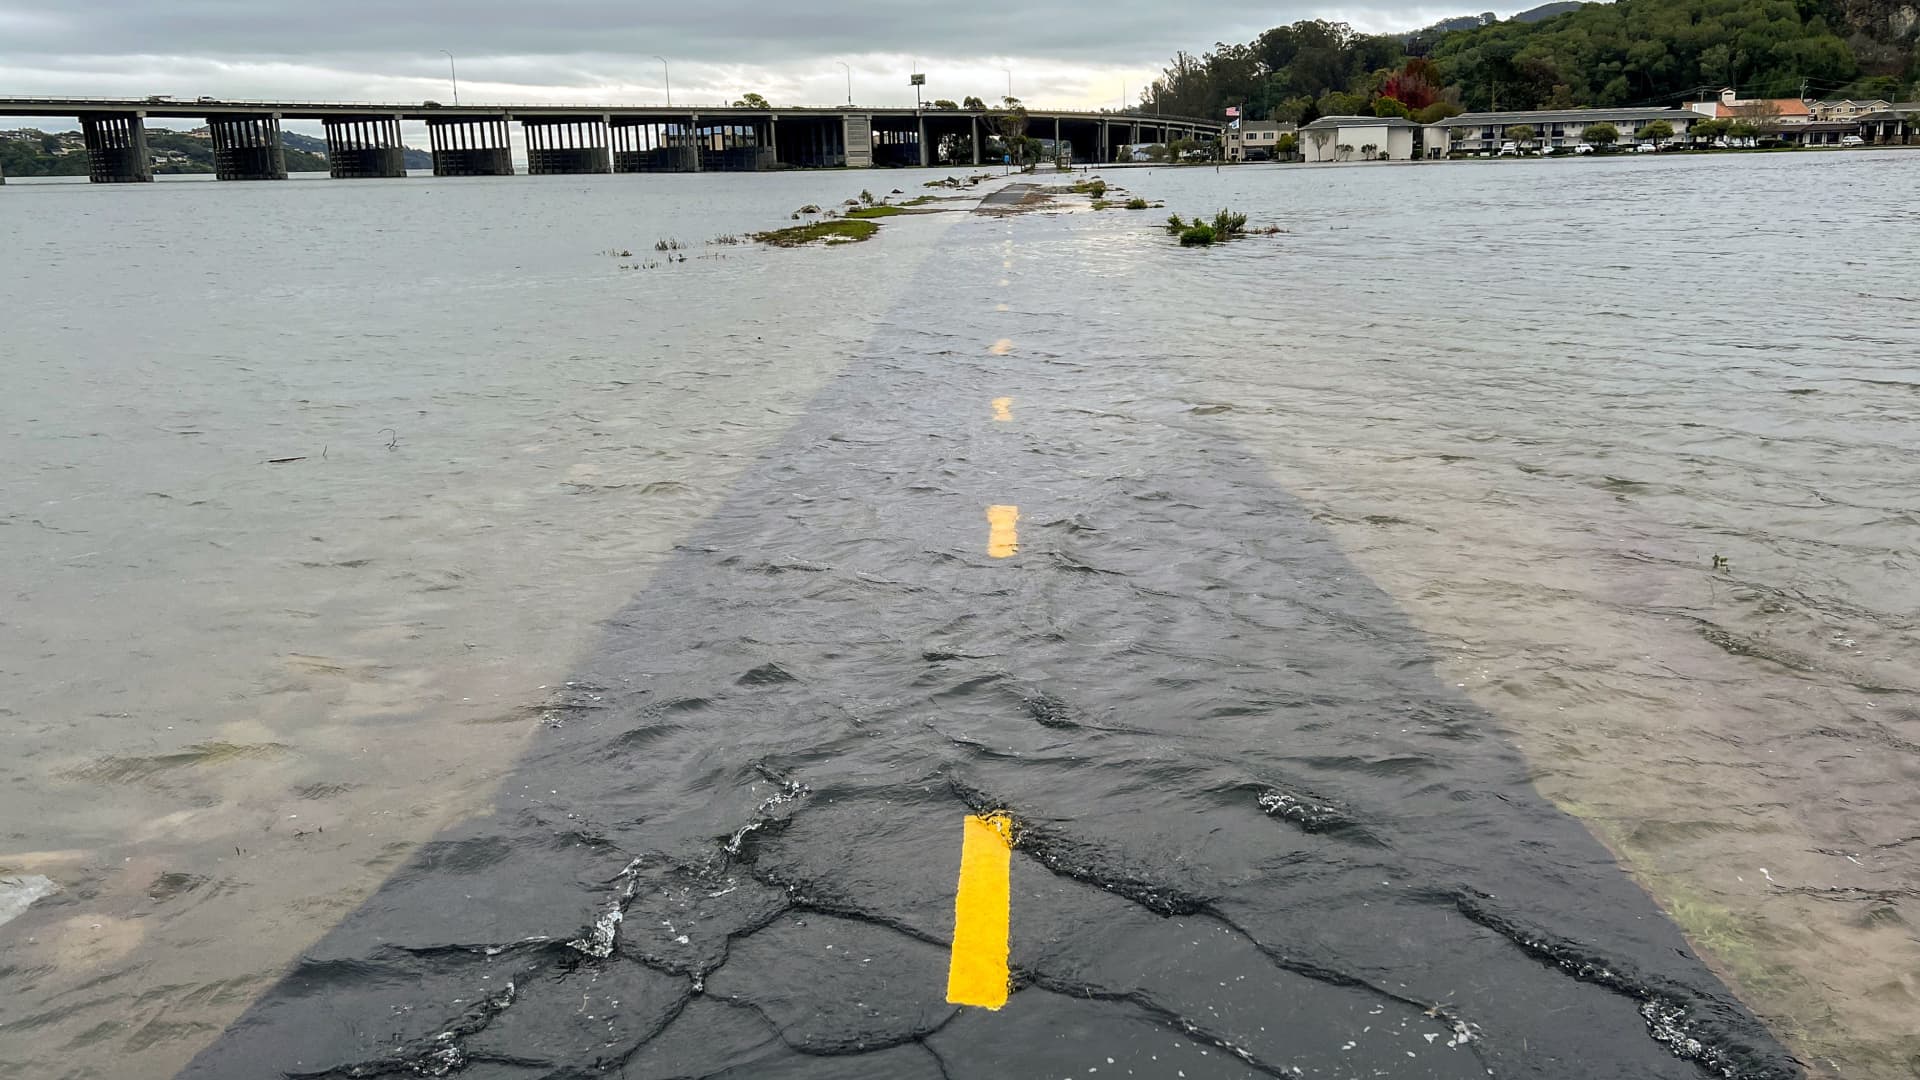 A section of the Sausalito/Mill Valley bike path is seen covered in ocean water in Mill Valley, California, on Jan. 3, 2022.